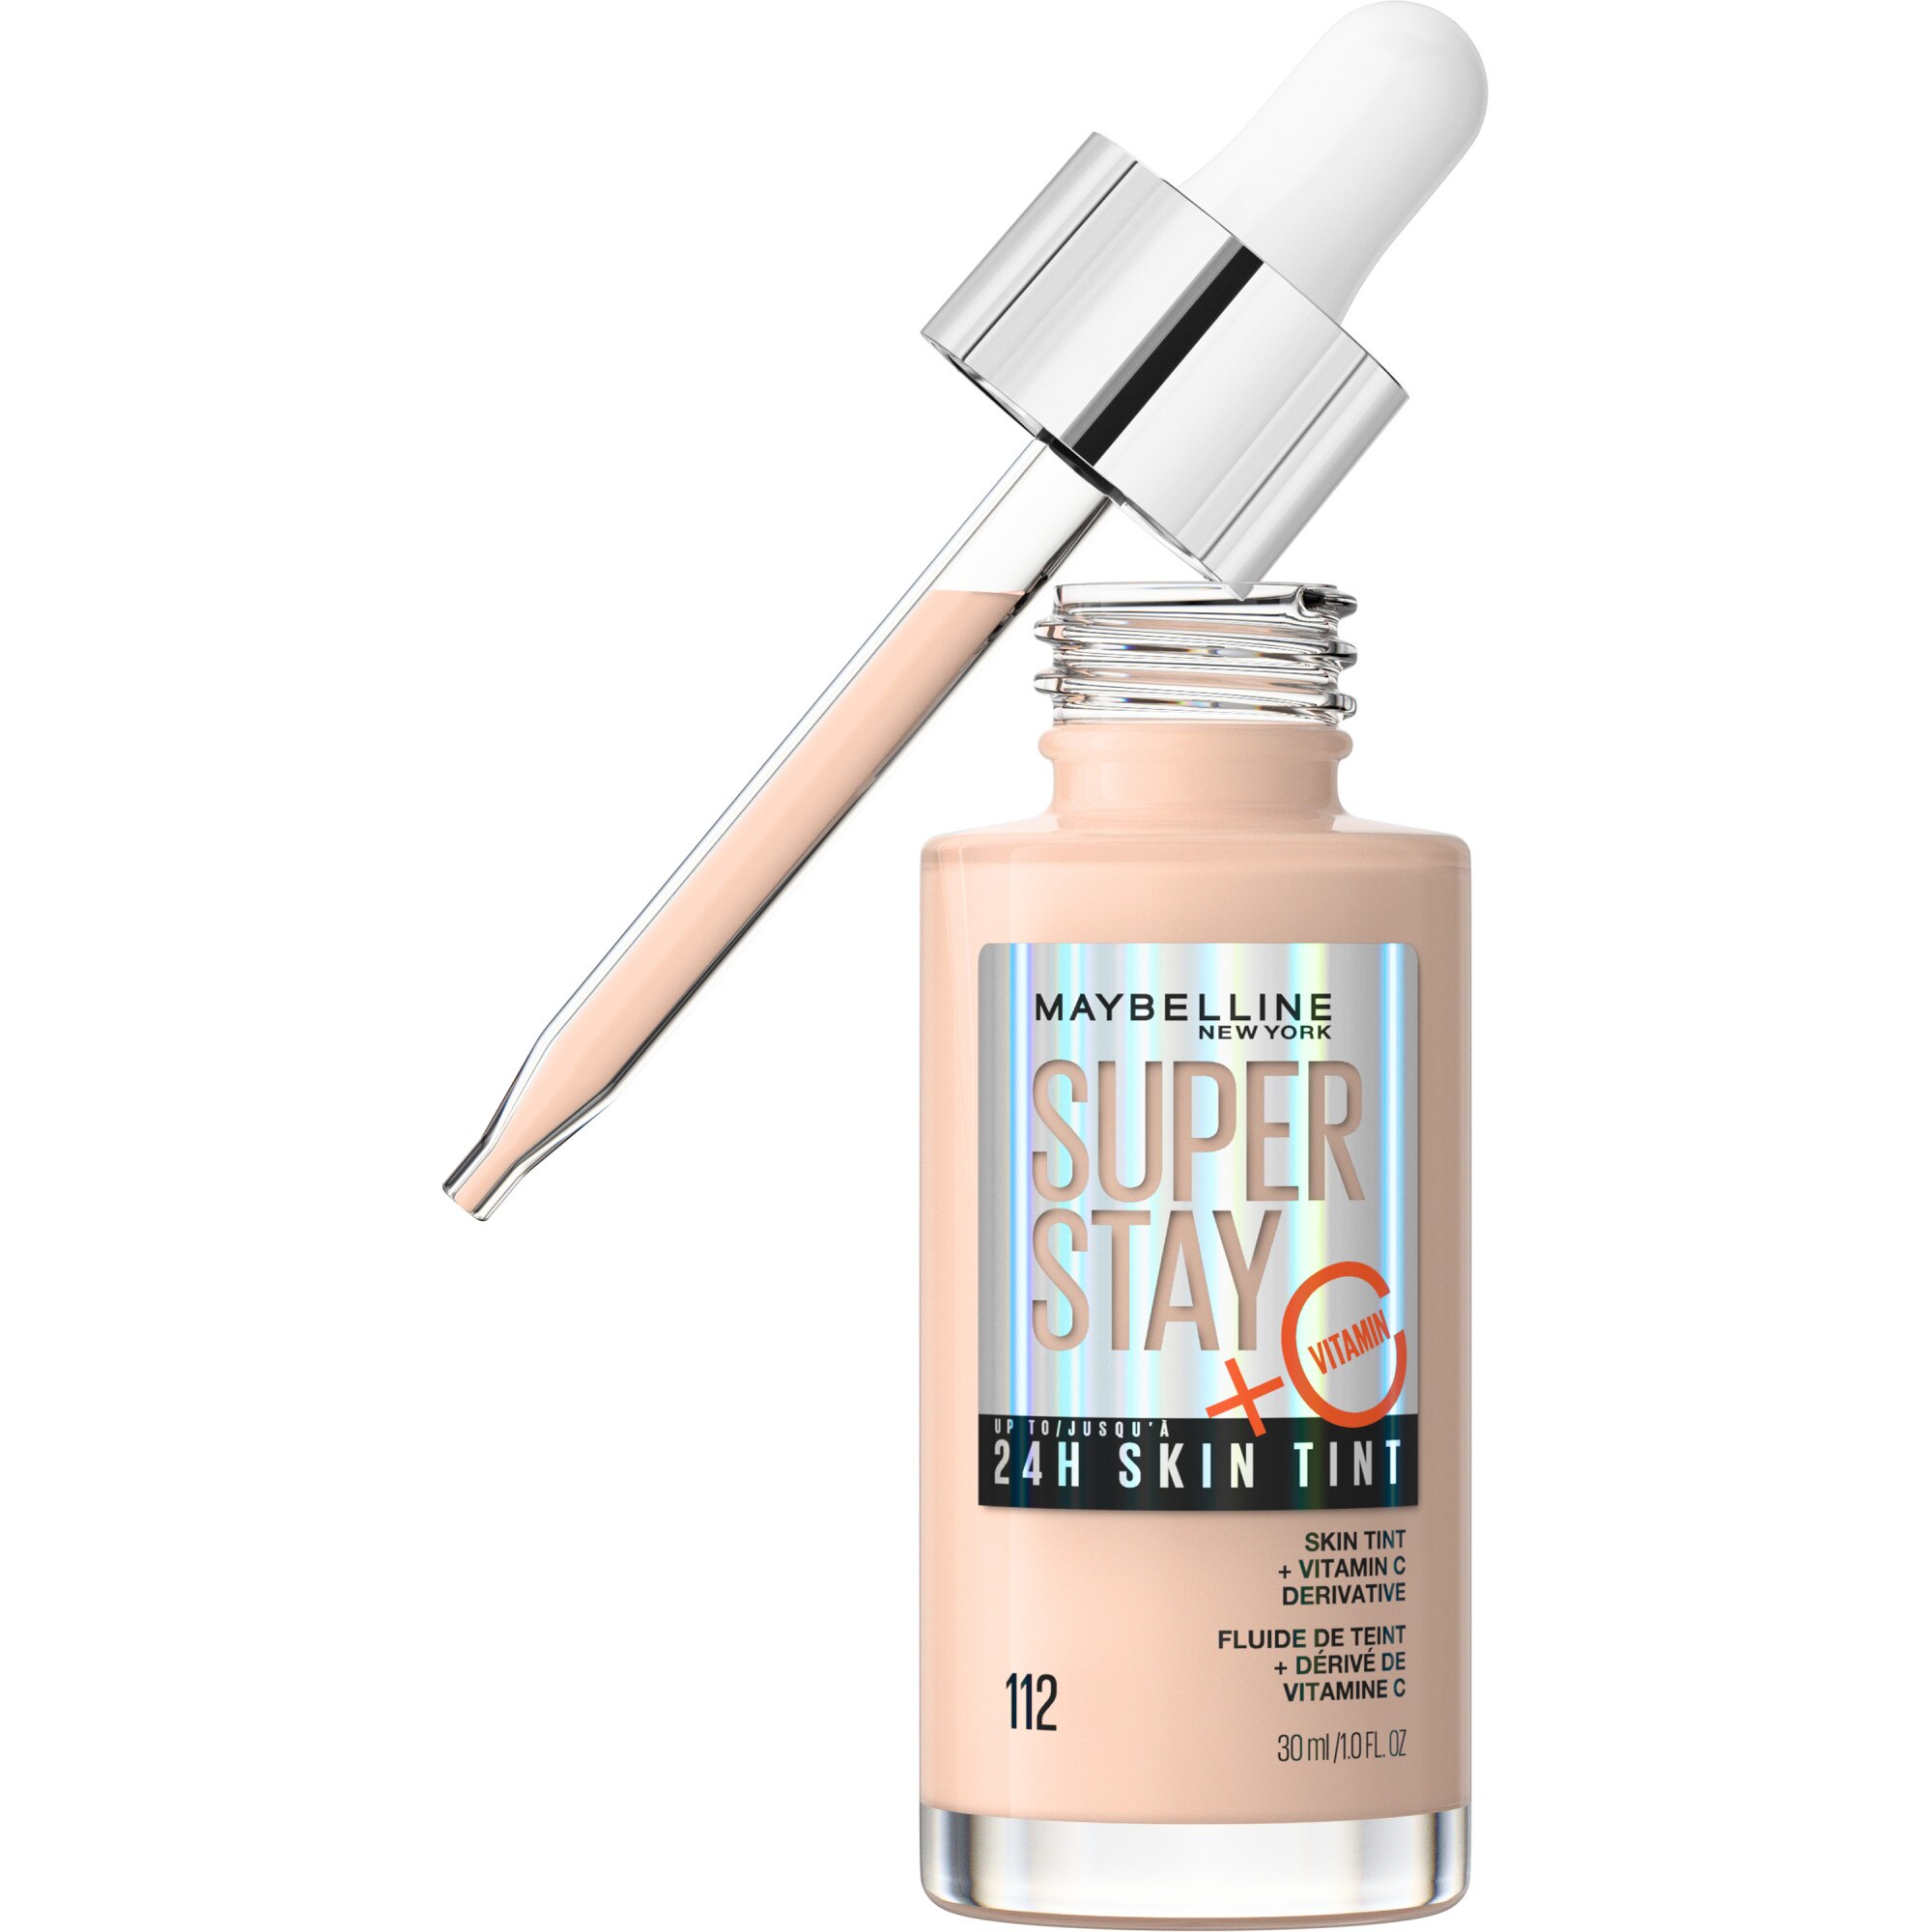 Maybelline New York Super Stay Up To 24HR Skin Tint With Vitamin C, 112, 1 Oz , CVS